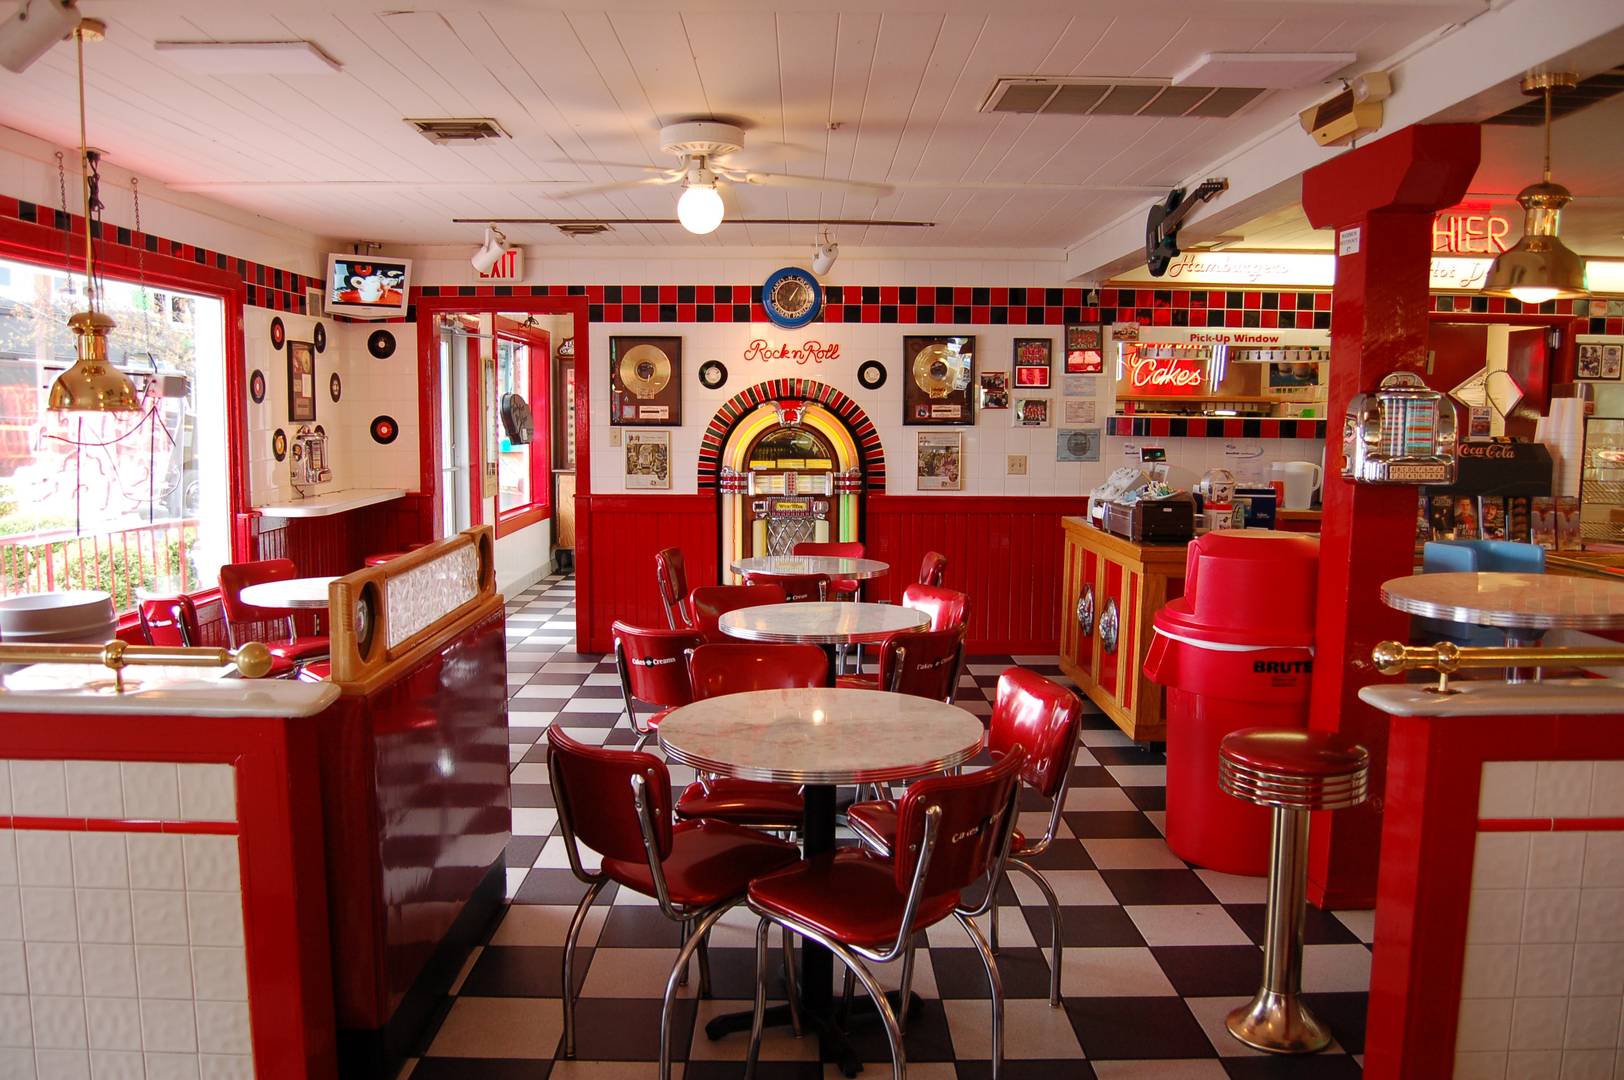 man made, room, chair, jukebox, red, retro, style, table